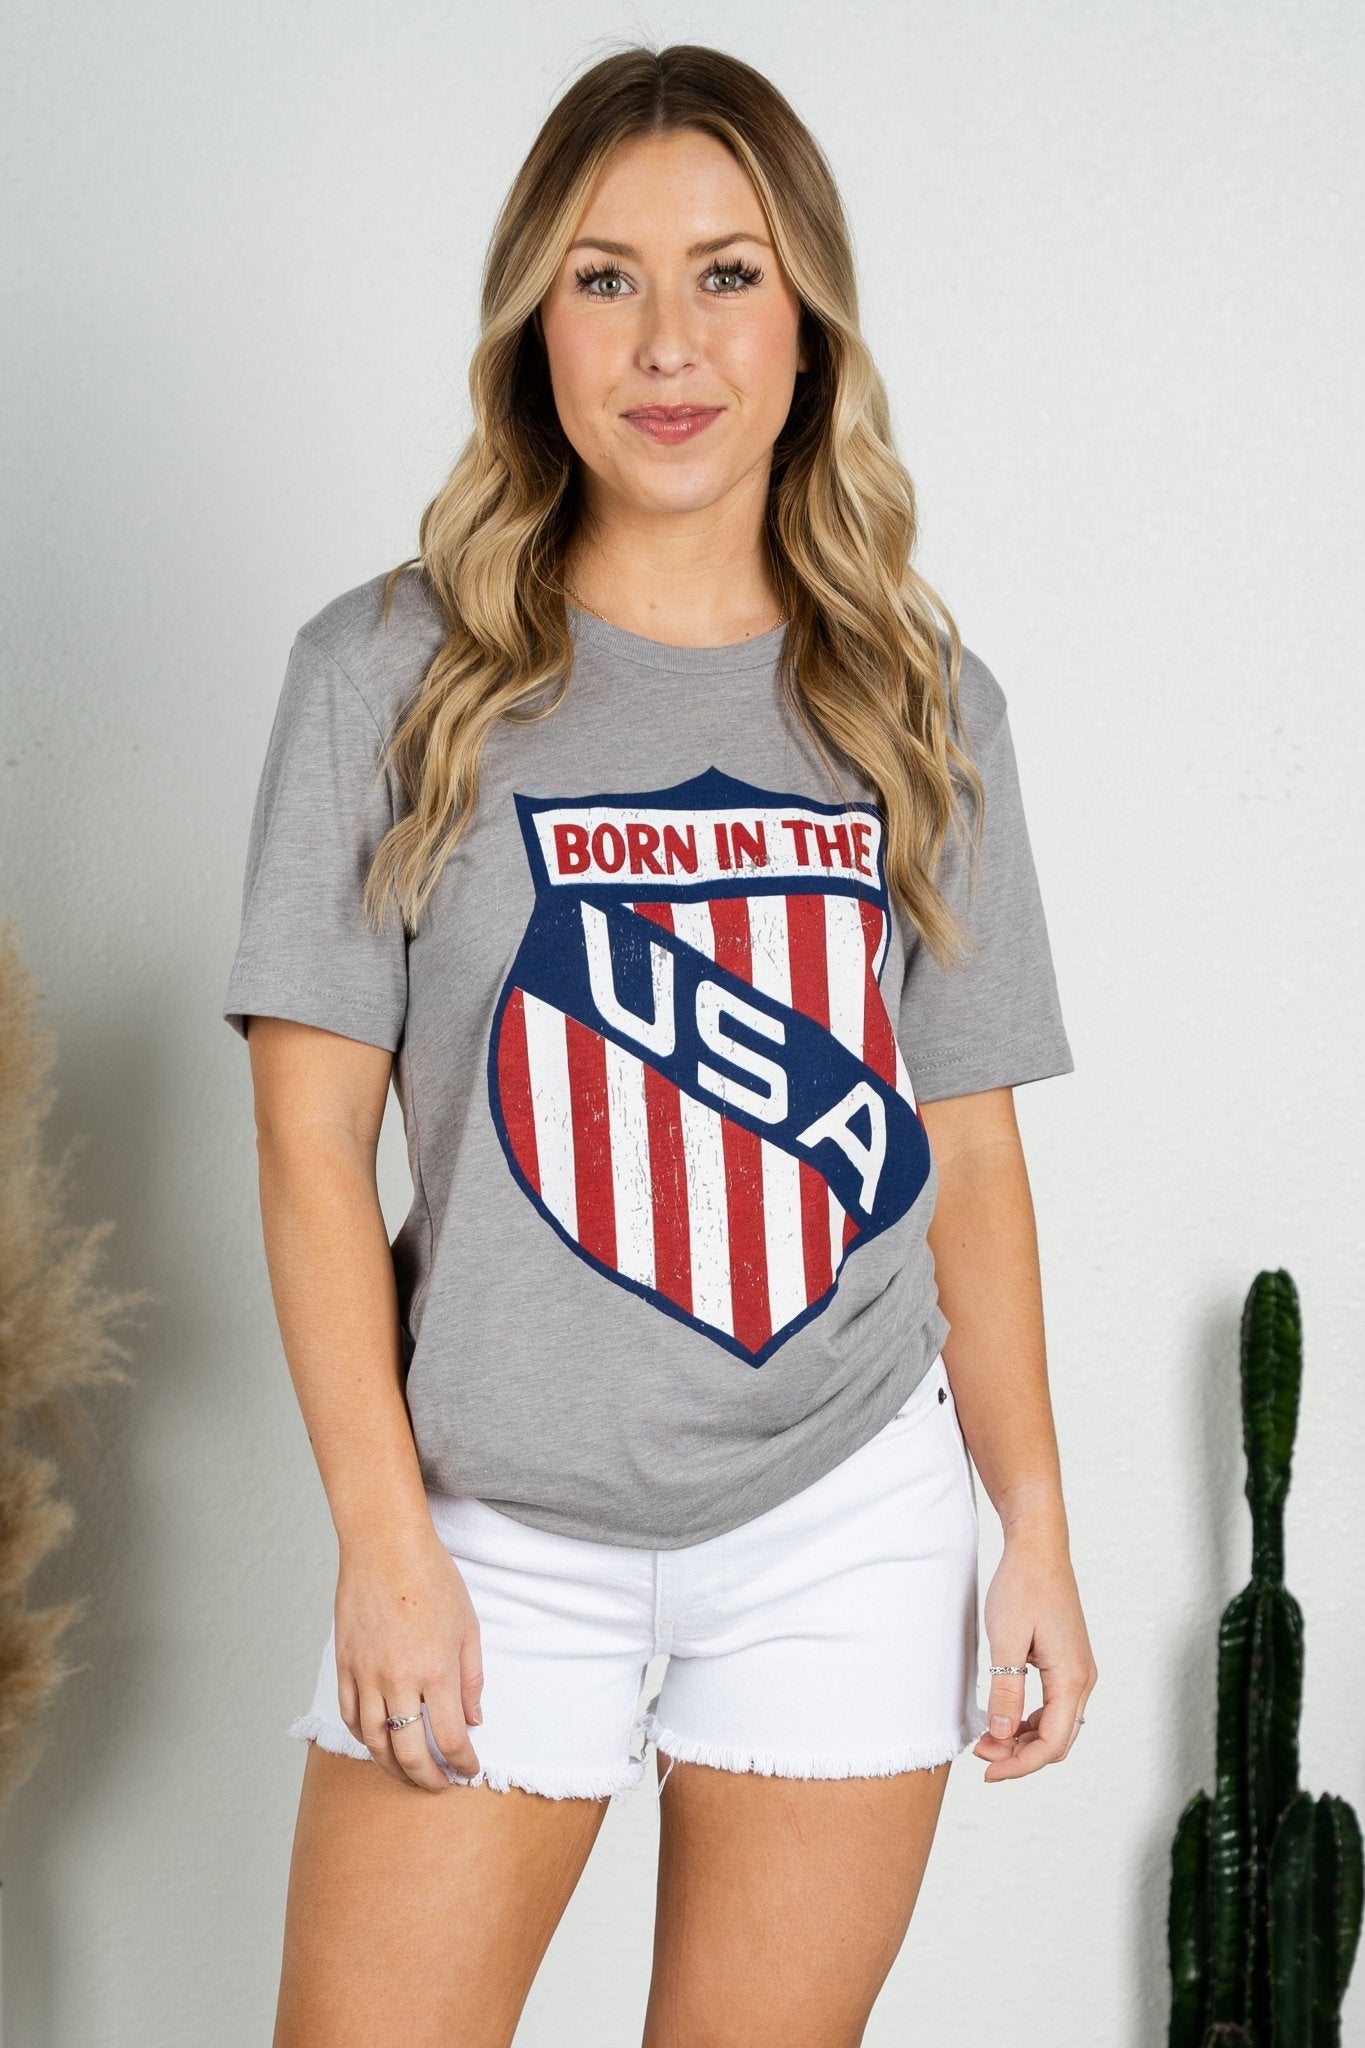 Born in the USA badge unisex short sleeve t-shirt grey - Trendy T-shirts - Cute Graphic Tee Fashion at Lush Fashion Lounge Boutique in Oklahoma